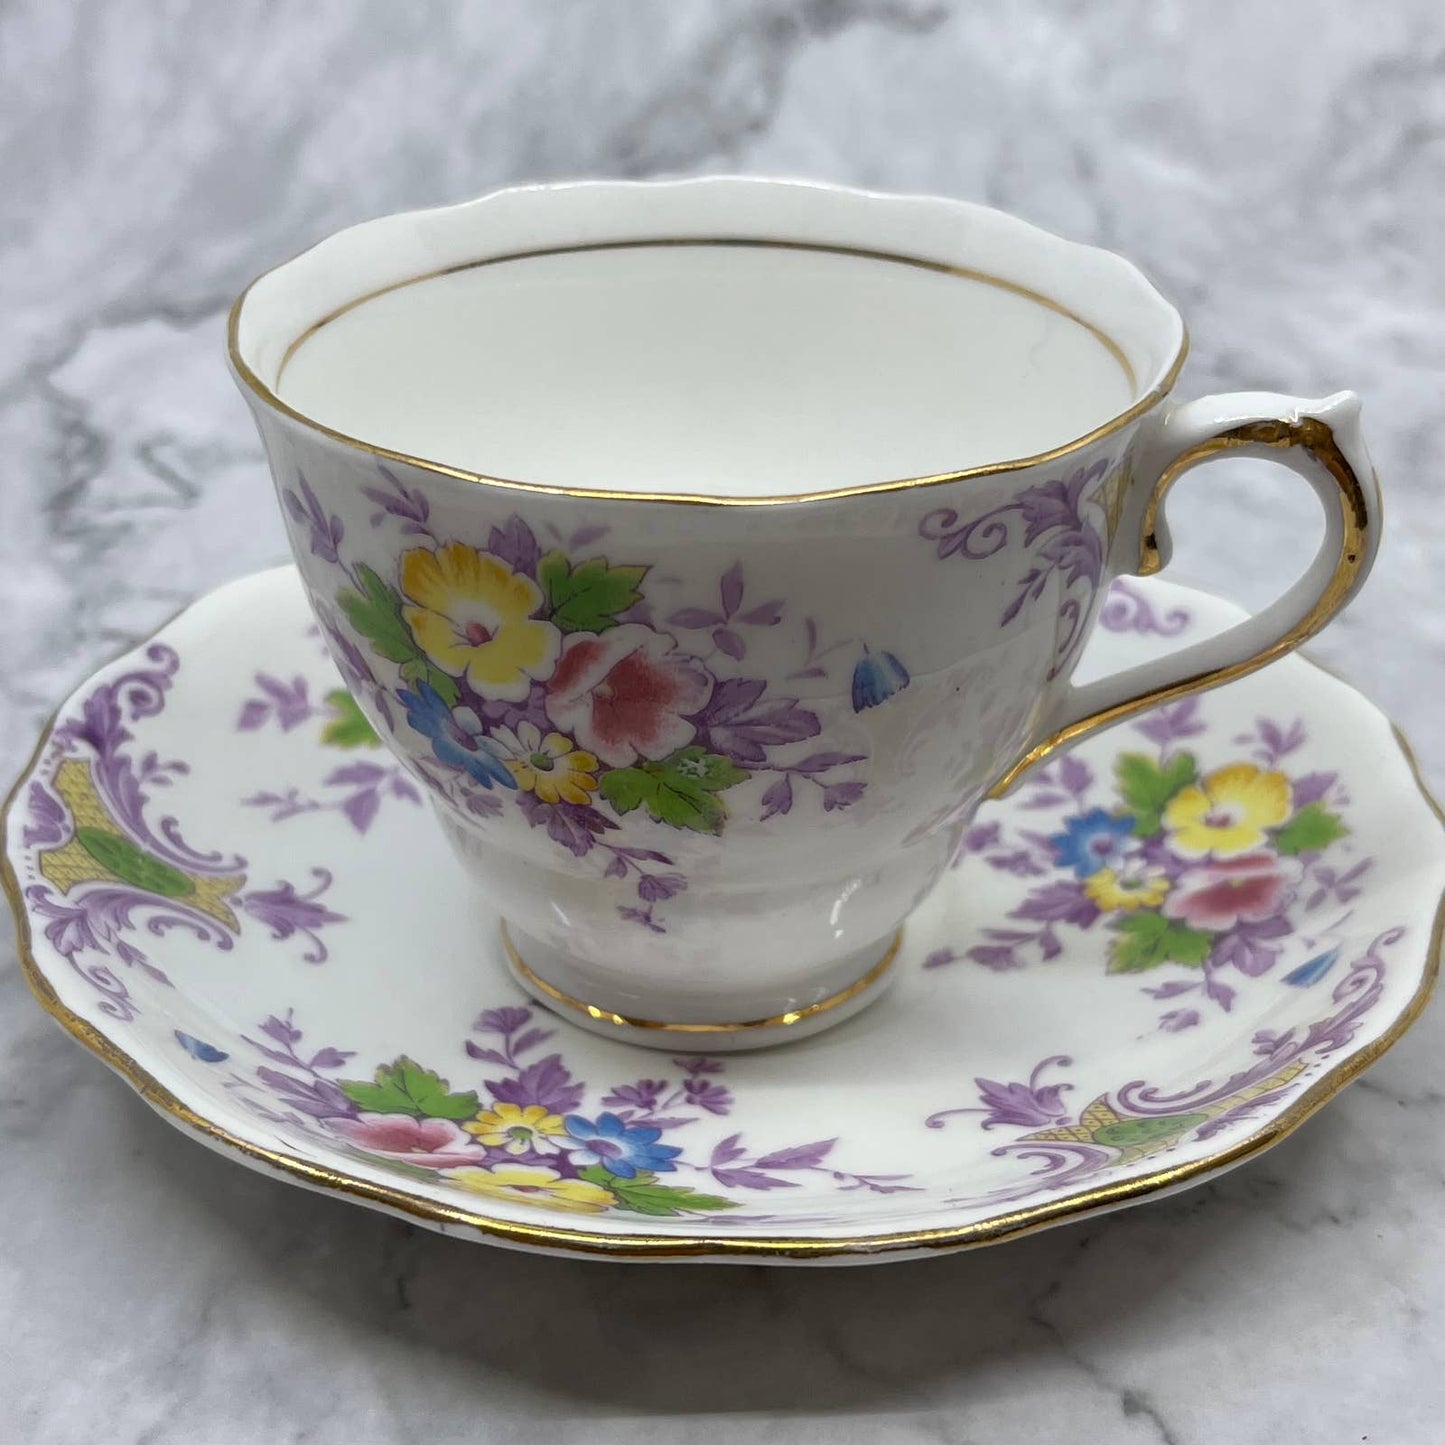 Colclough Teacup and Saucer Genuine Bone China Made In Longton Floral Design TD1